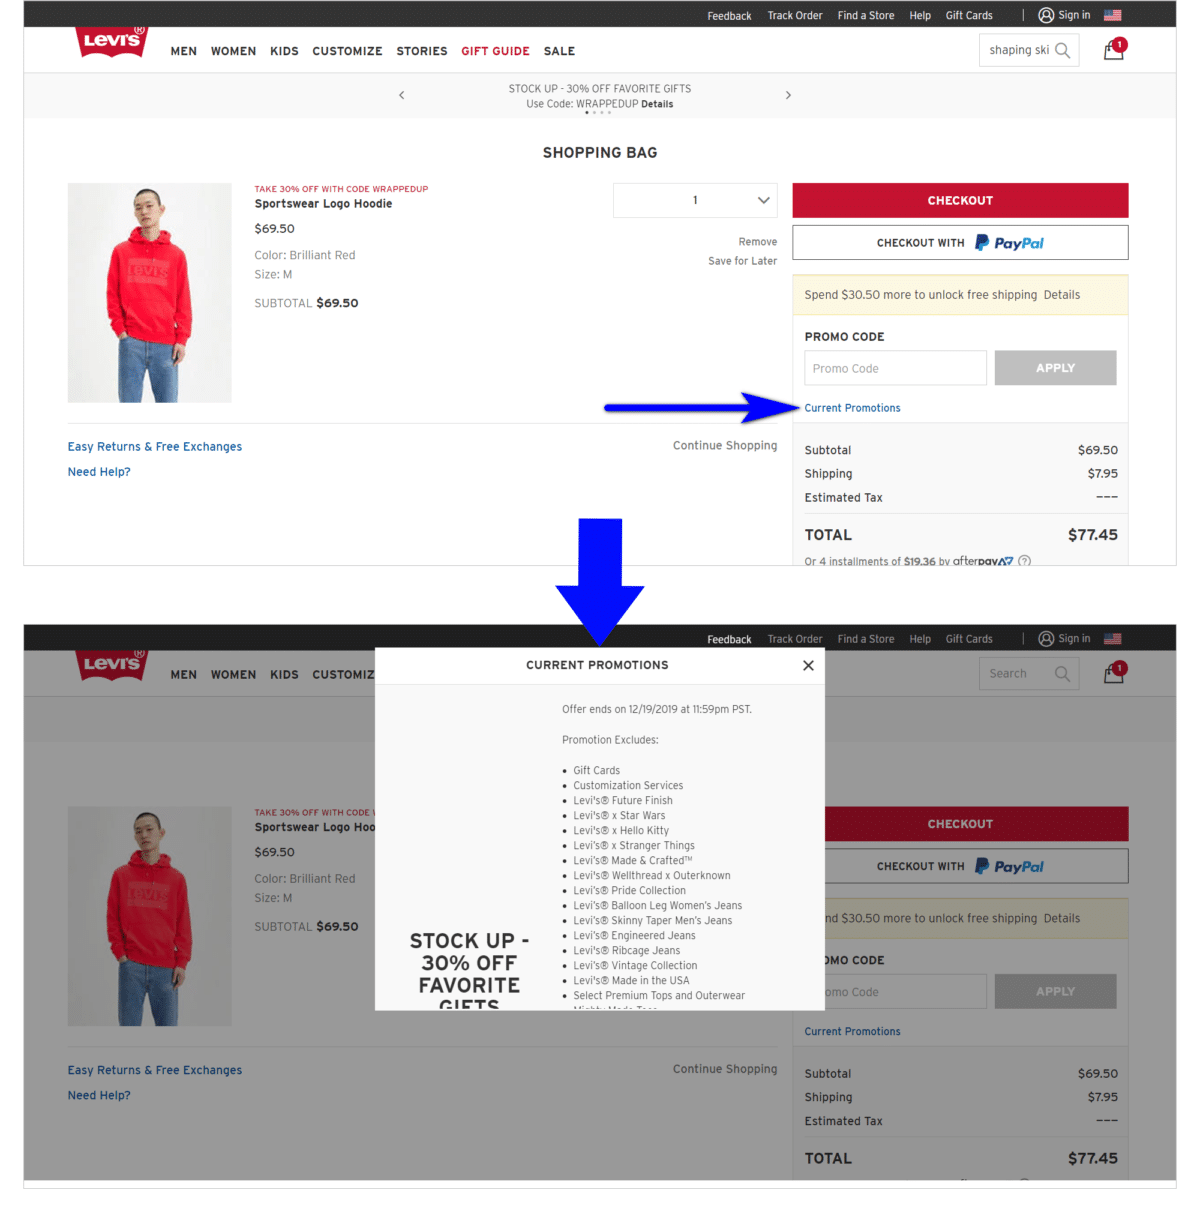 Levi's shopping cart page illustrates a promotional strategy with a clickable 'Current Promotions' link, revealing a popover detailing a 30% off offer on select items, effectively communicating available discounts directly within the cart.